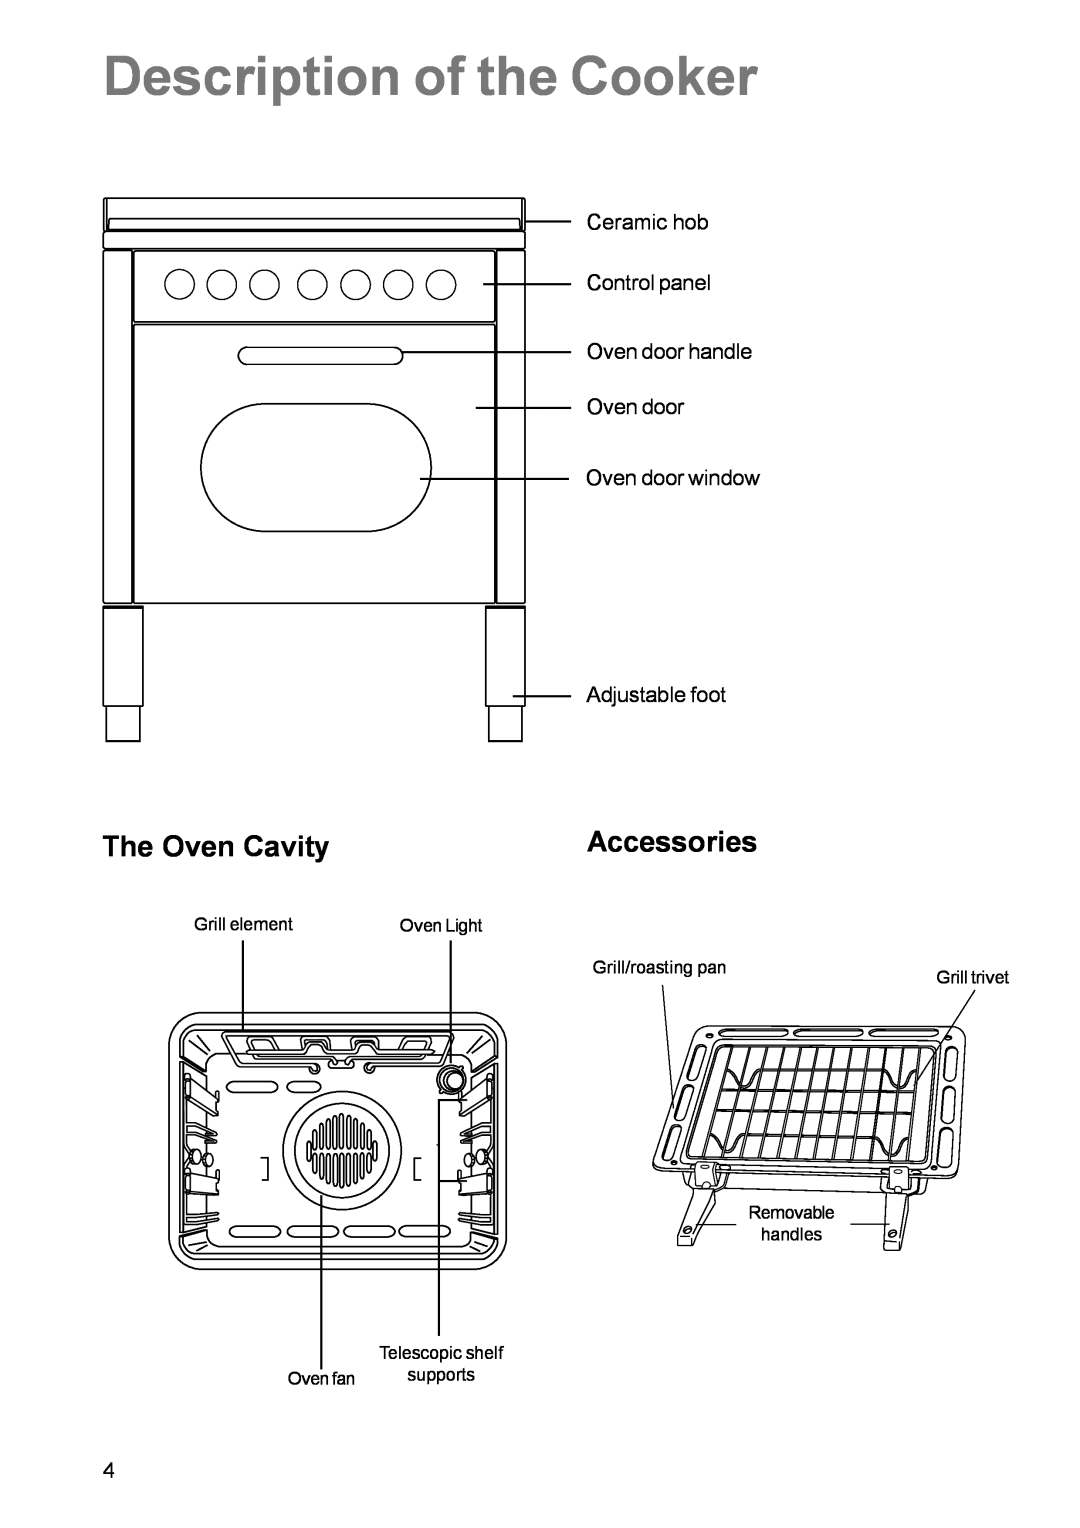 Zanussi ZCE 700 manual Description of the Cooker, The Oven Cavity, Accessories, Adjustable foot 